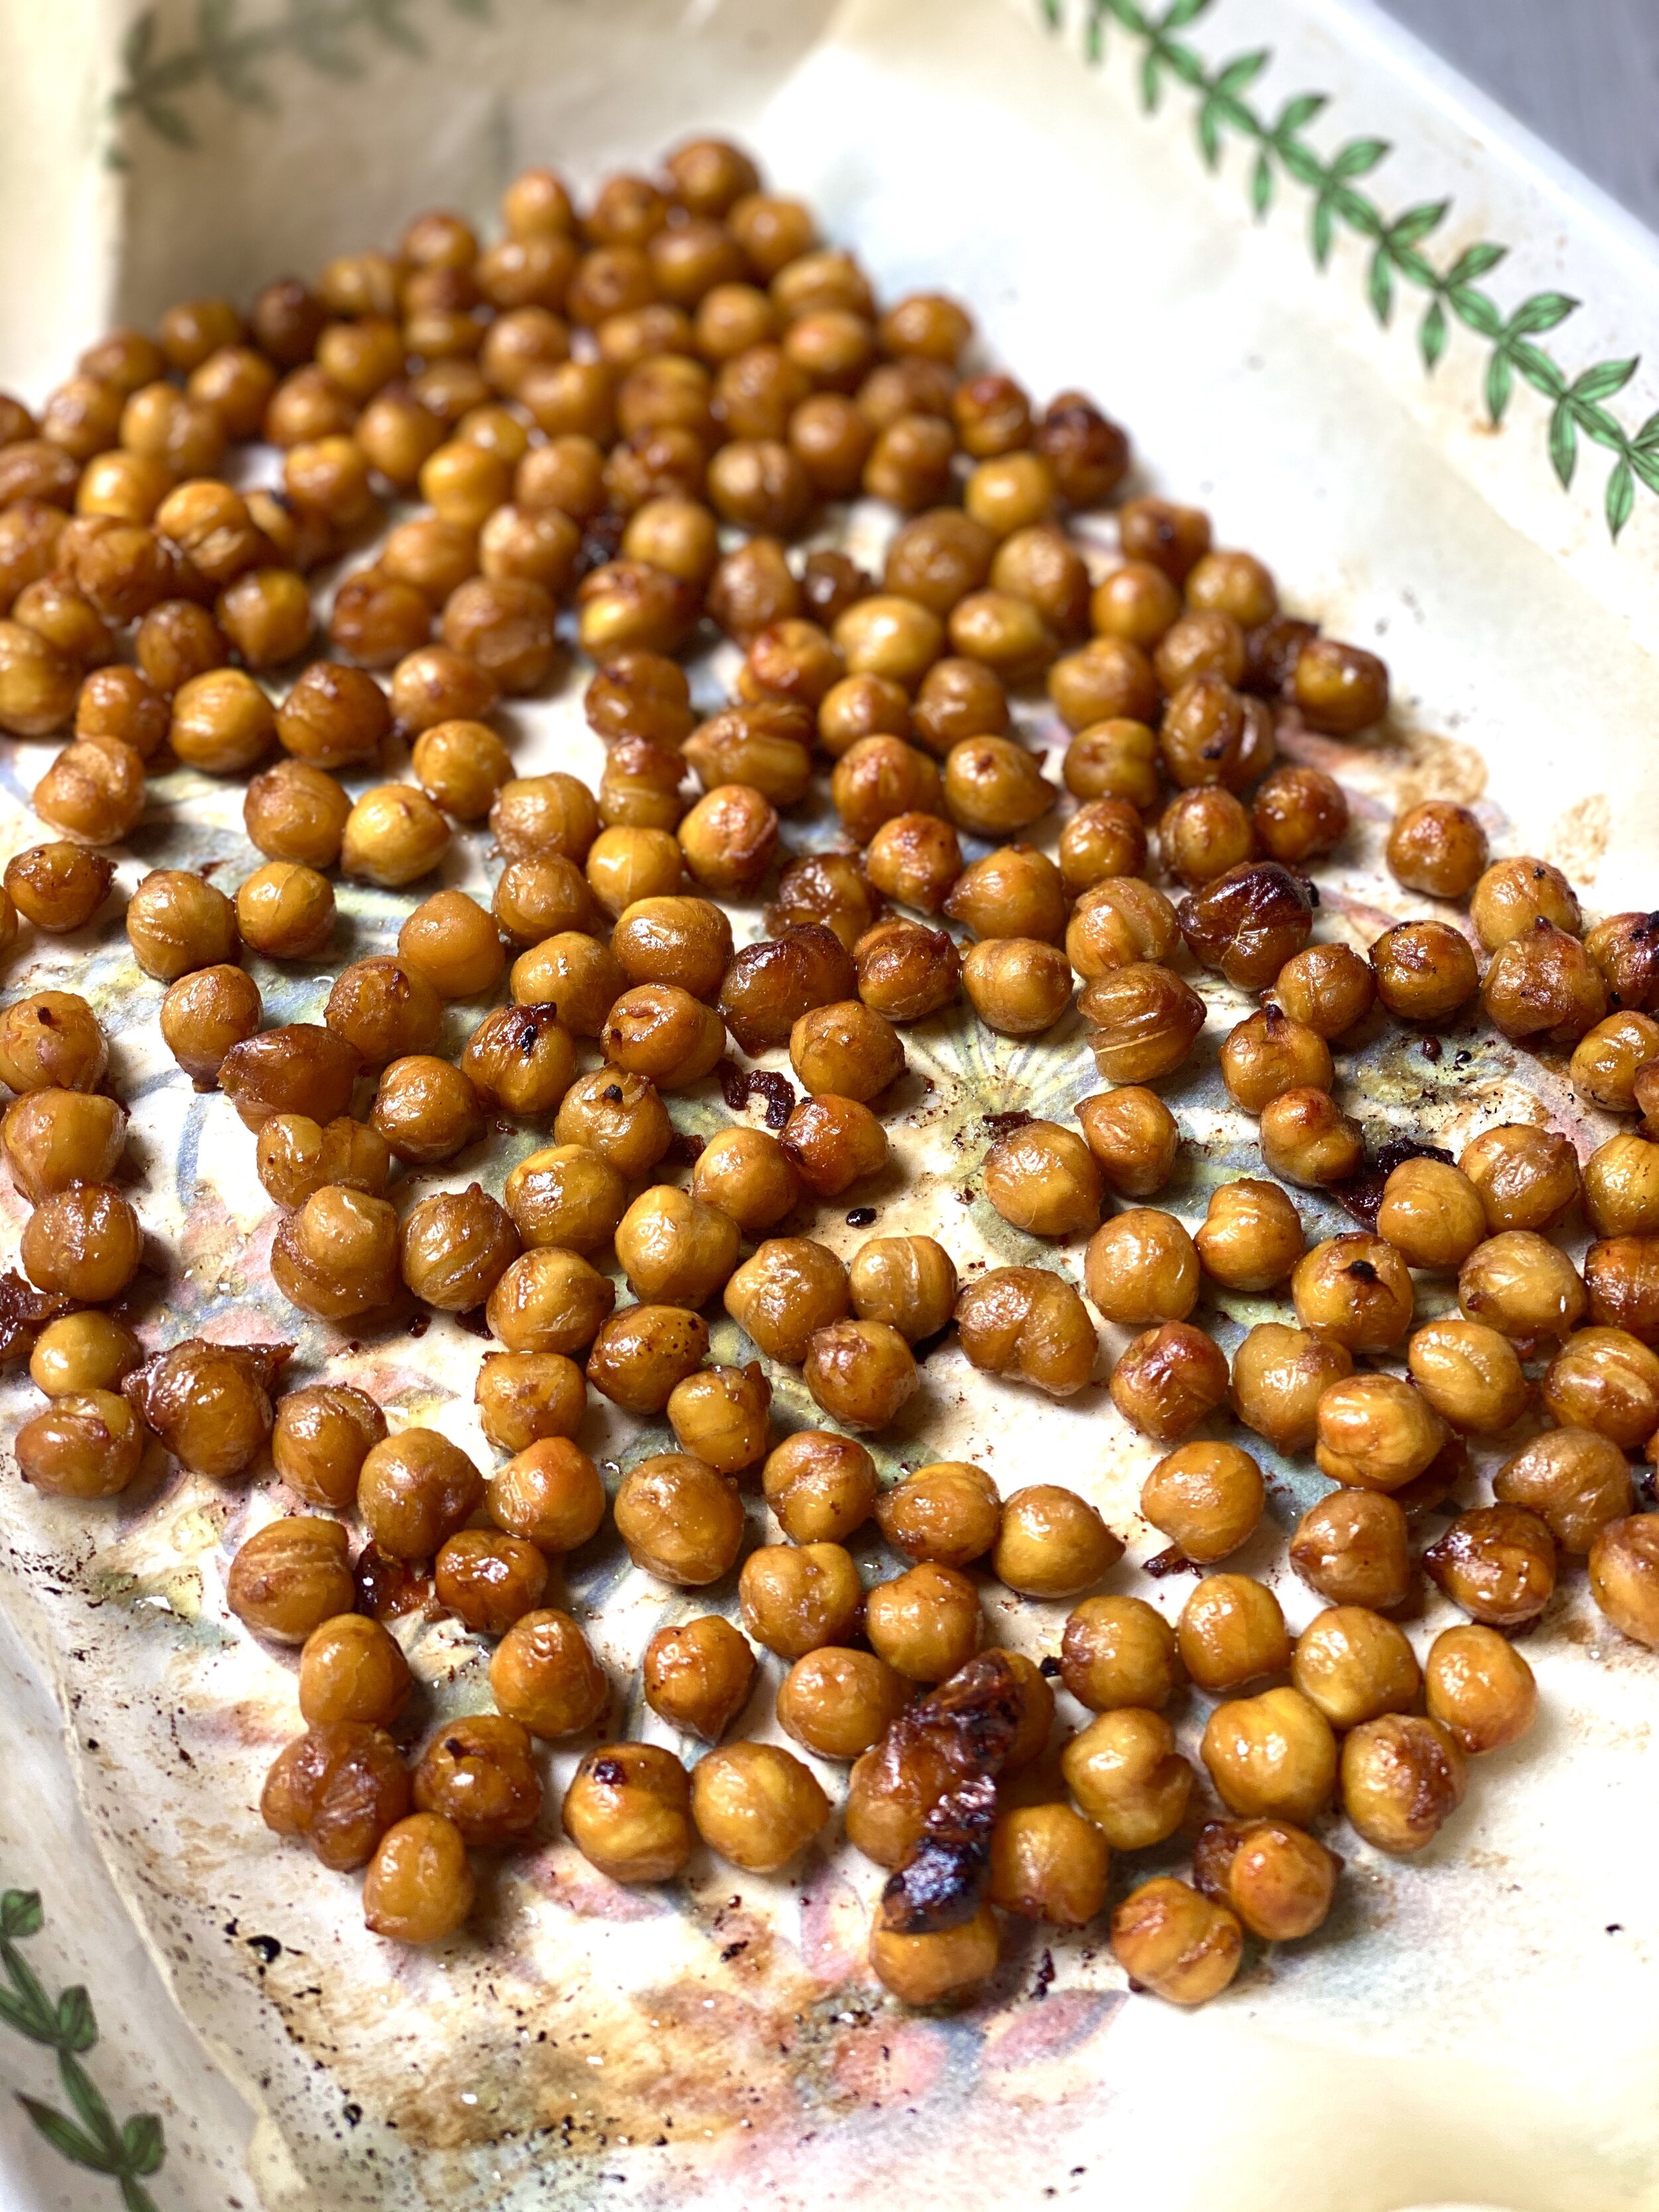 Smokey, roasted chickpeas by Joey and Katy